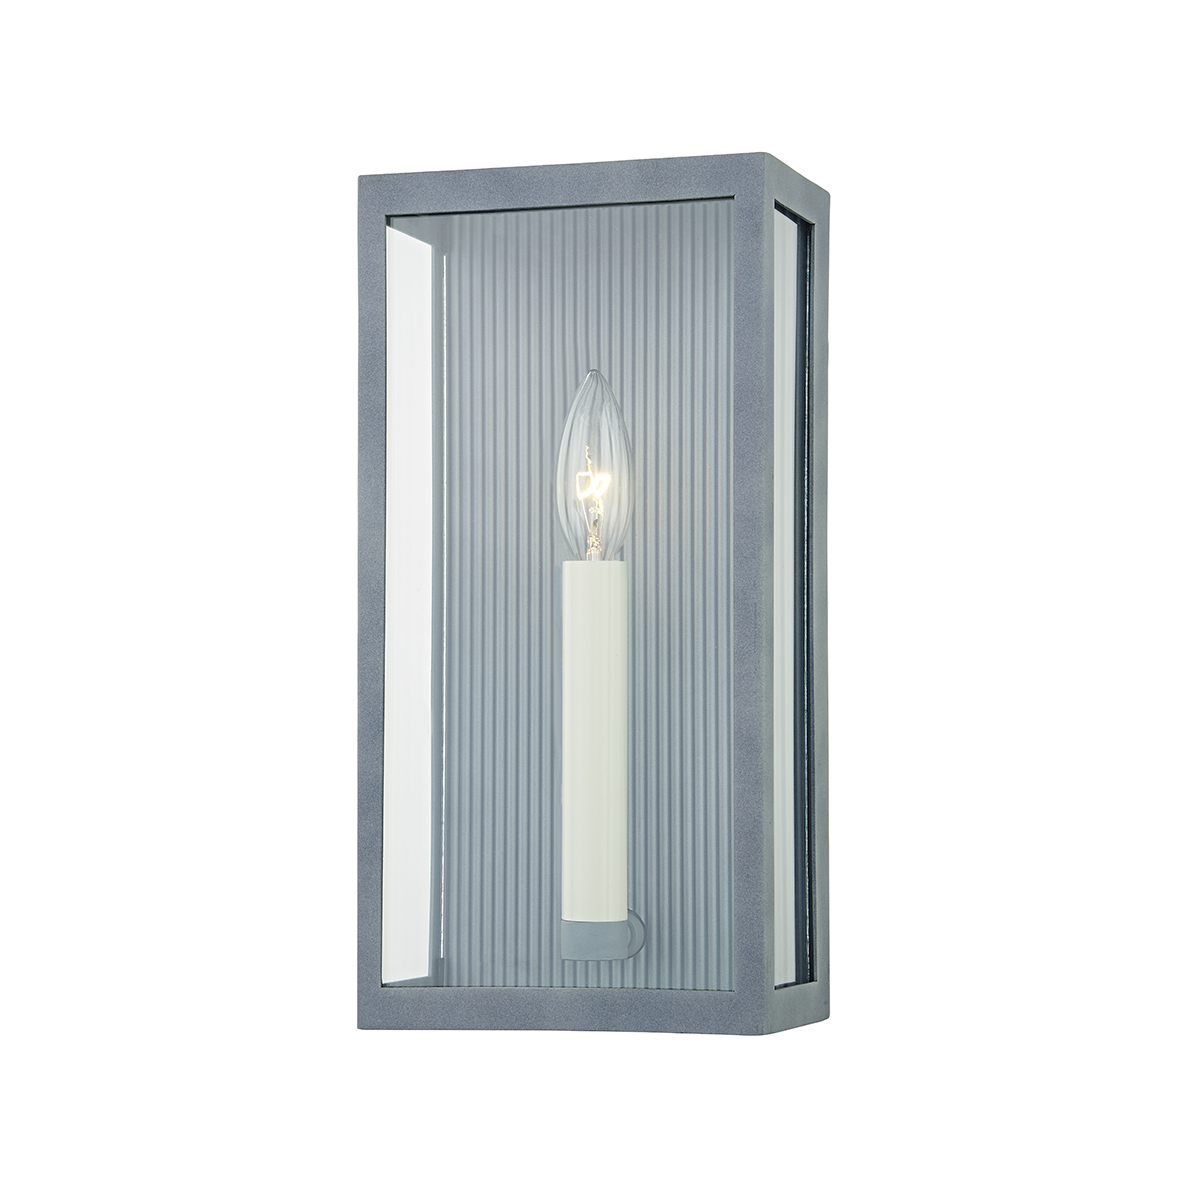 Troy Lighting 1 LIGHT EXTERIOR WALL SCONCE B1031 Outdoor l Wall Troy Lighting WEATHERED ZINC  